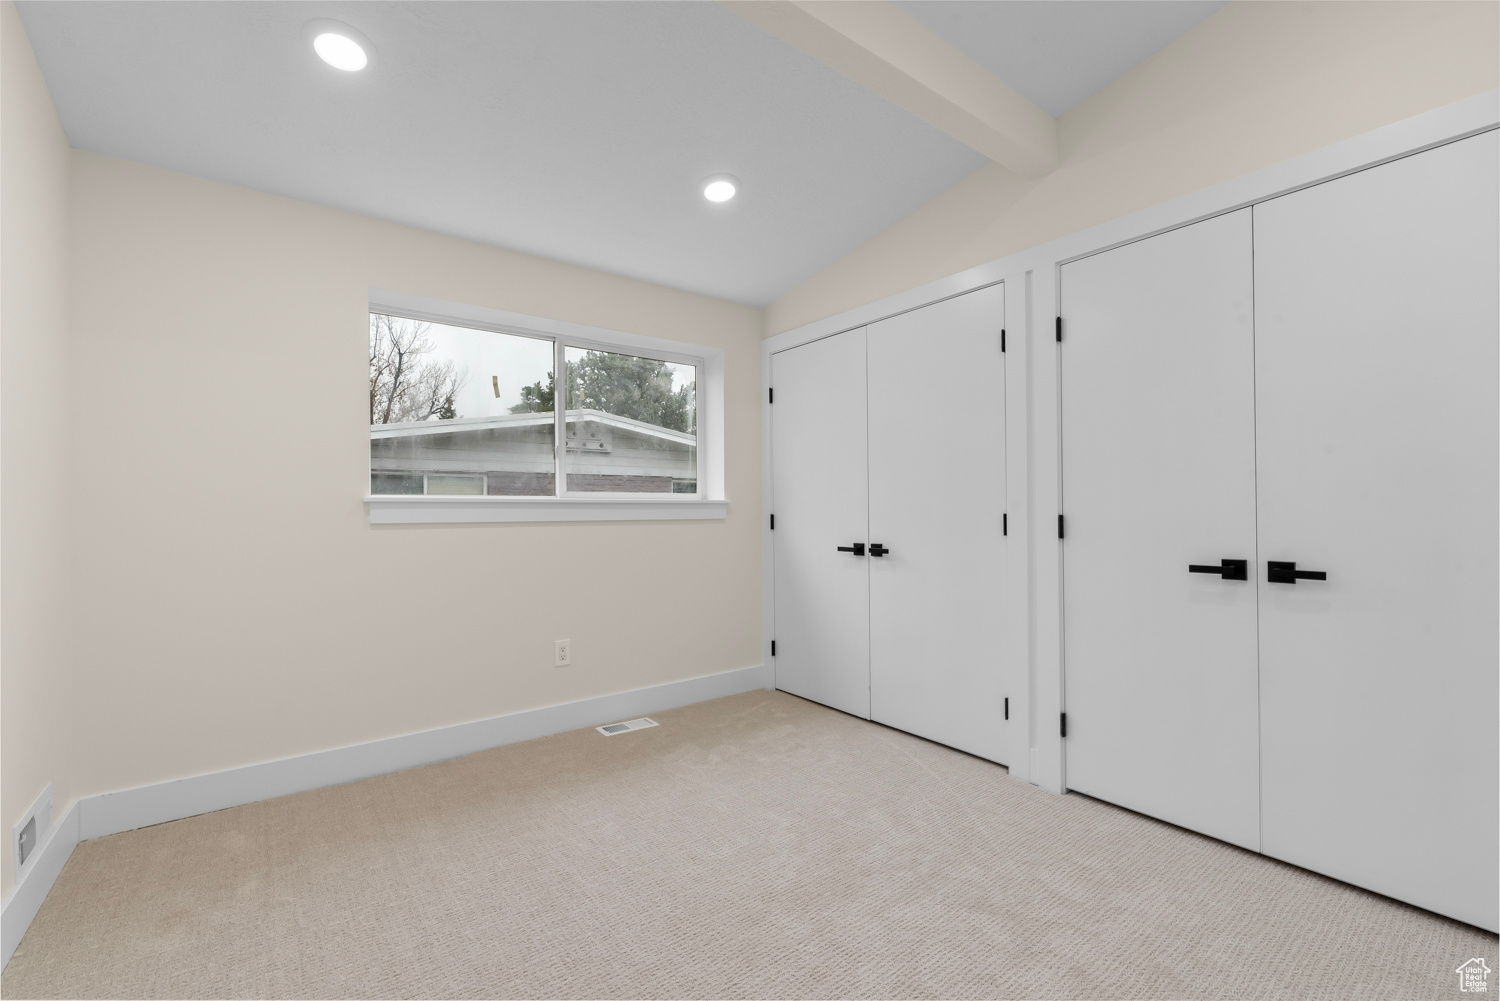 Unfurnished bedroom with two closets, lofted ceiling with beams, and light carpet